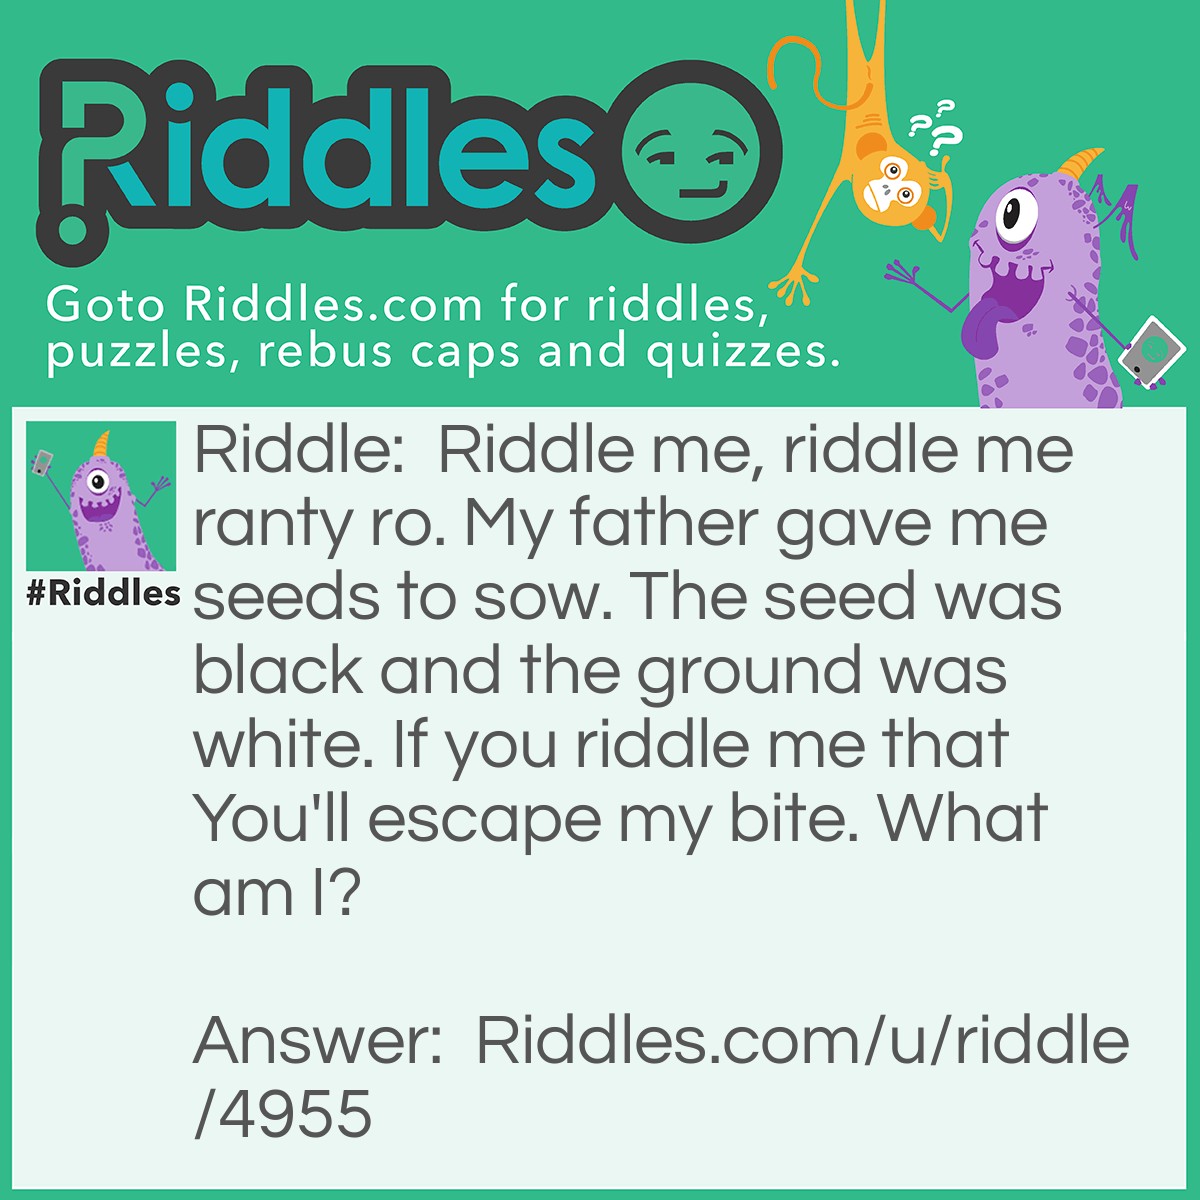 Riddle: Riddle me, riddle me ranty ro. My father gave me seeds to sow. The seed was black and the ground was white. If you riddle me that You'll escape my bite. What am I? Answer: Pen and Paper.